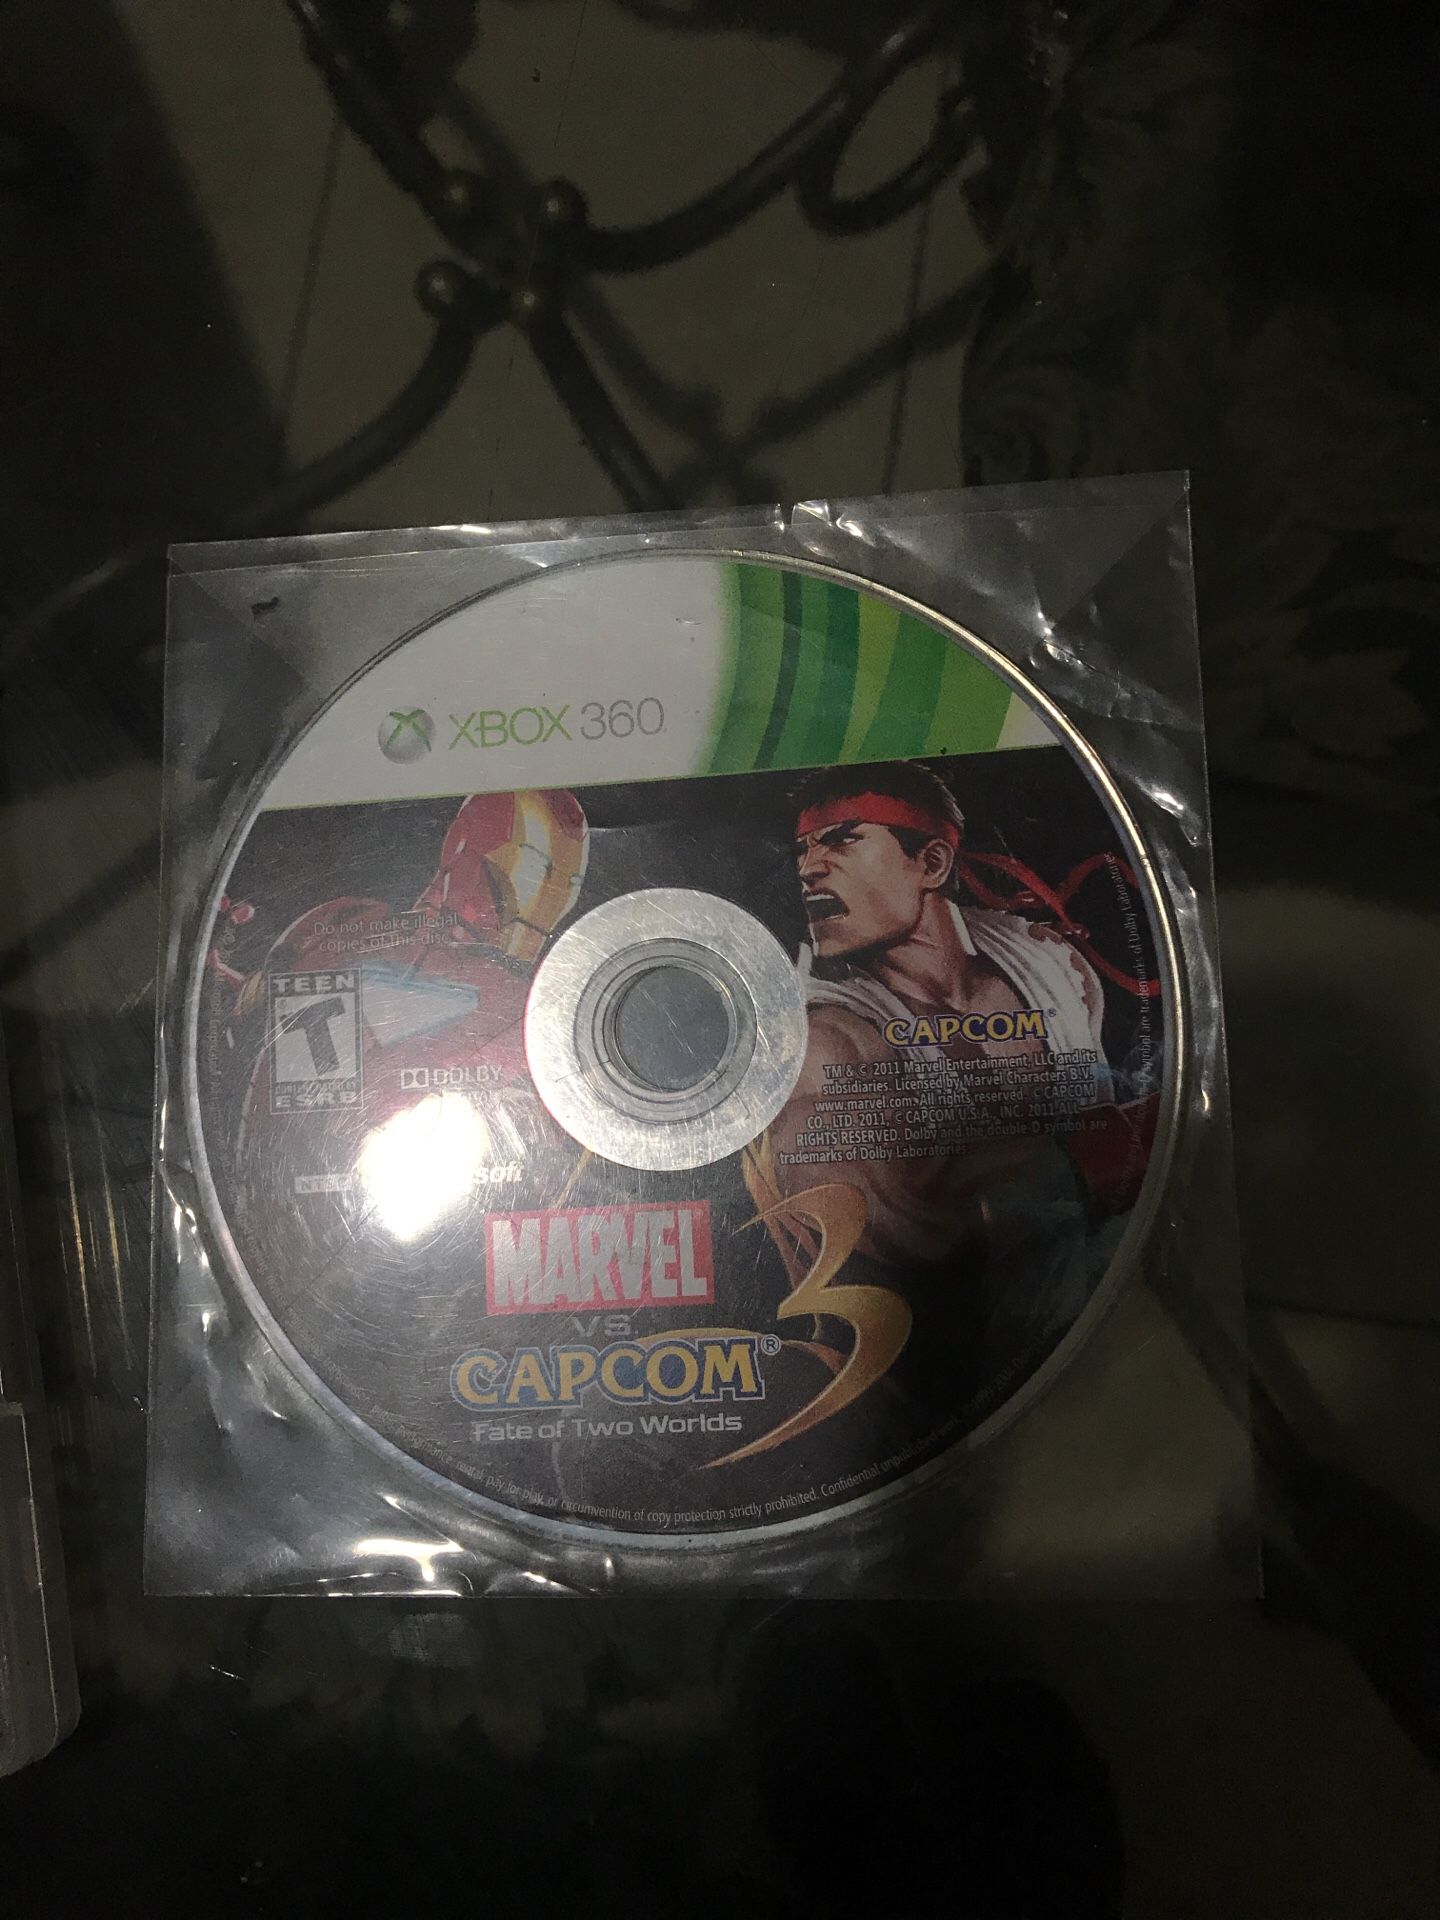 Xbox 360 game marvel vs cap com 3 and resident evil for ps3 in box